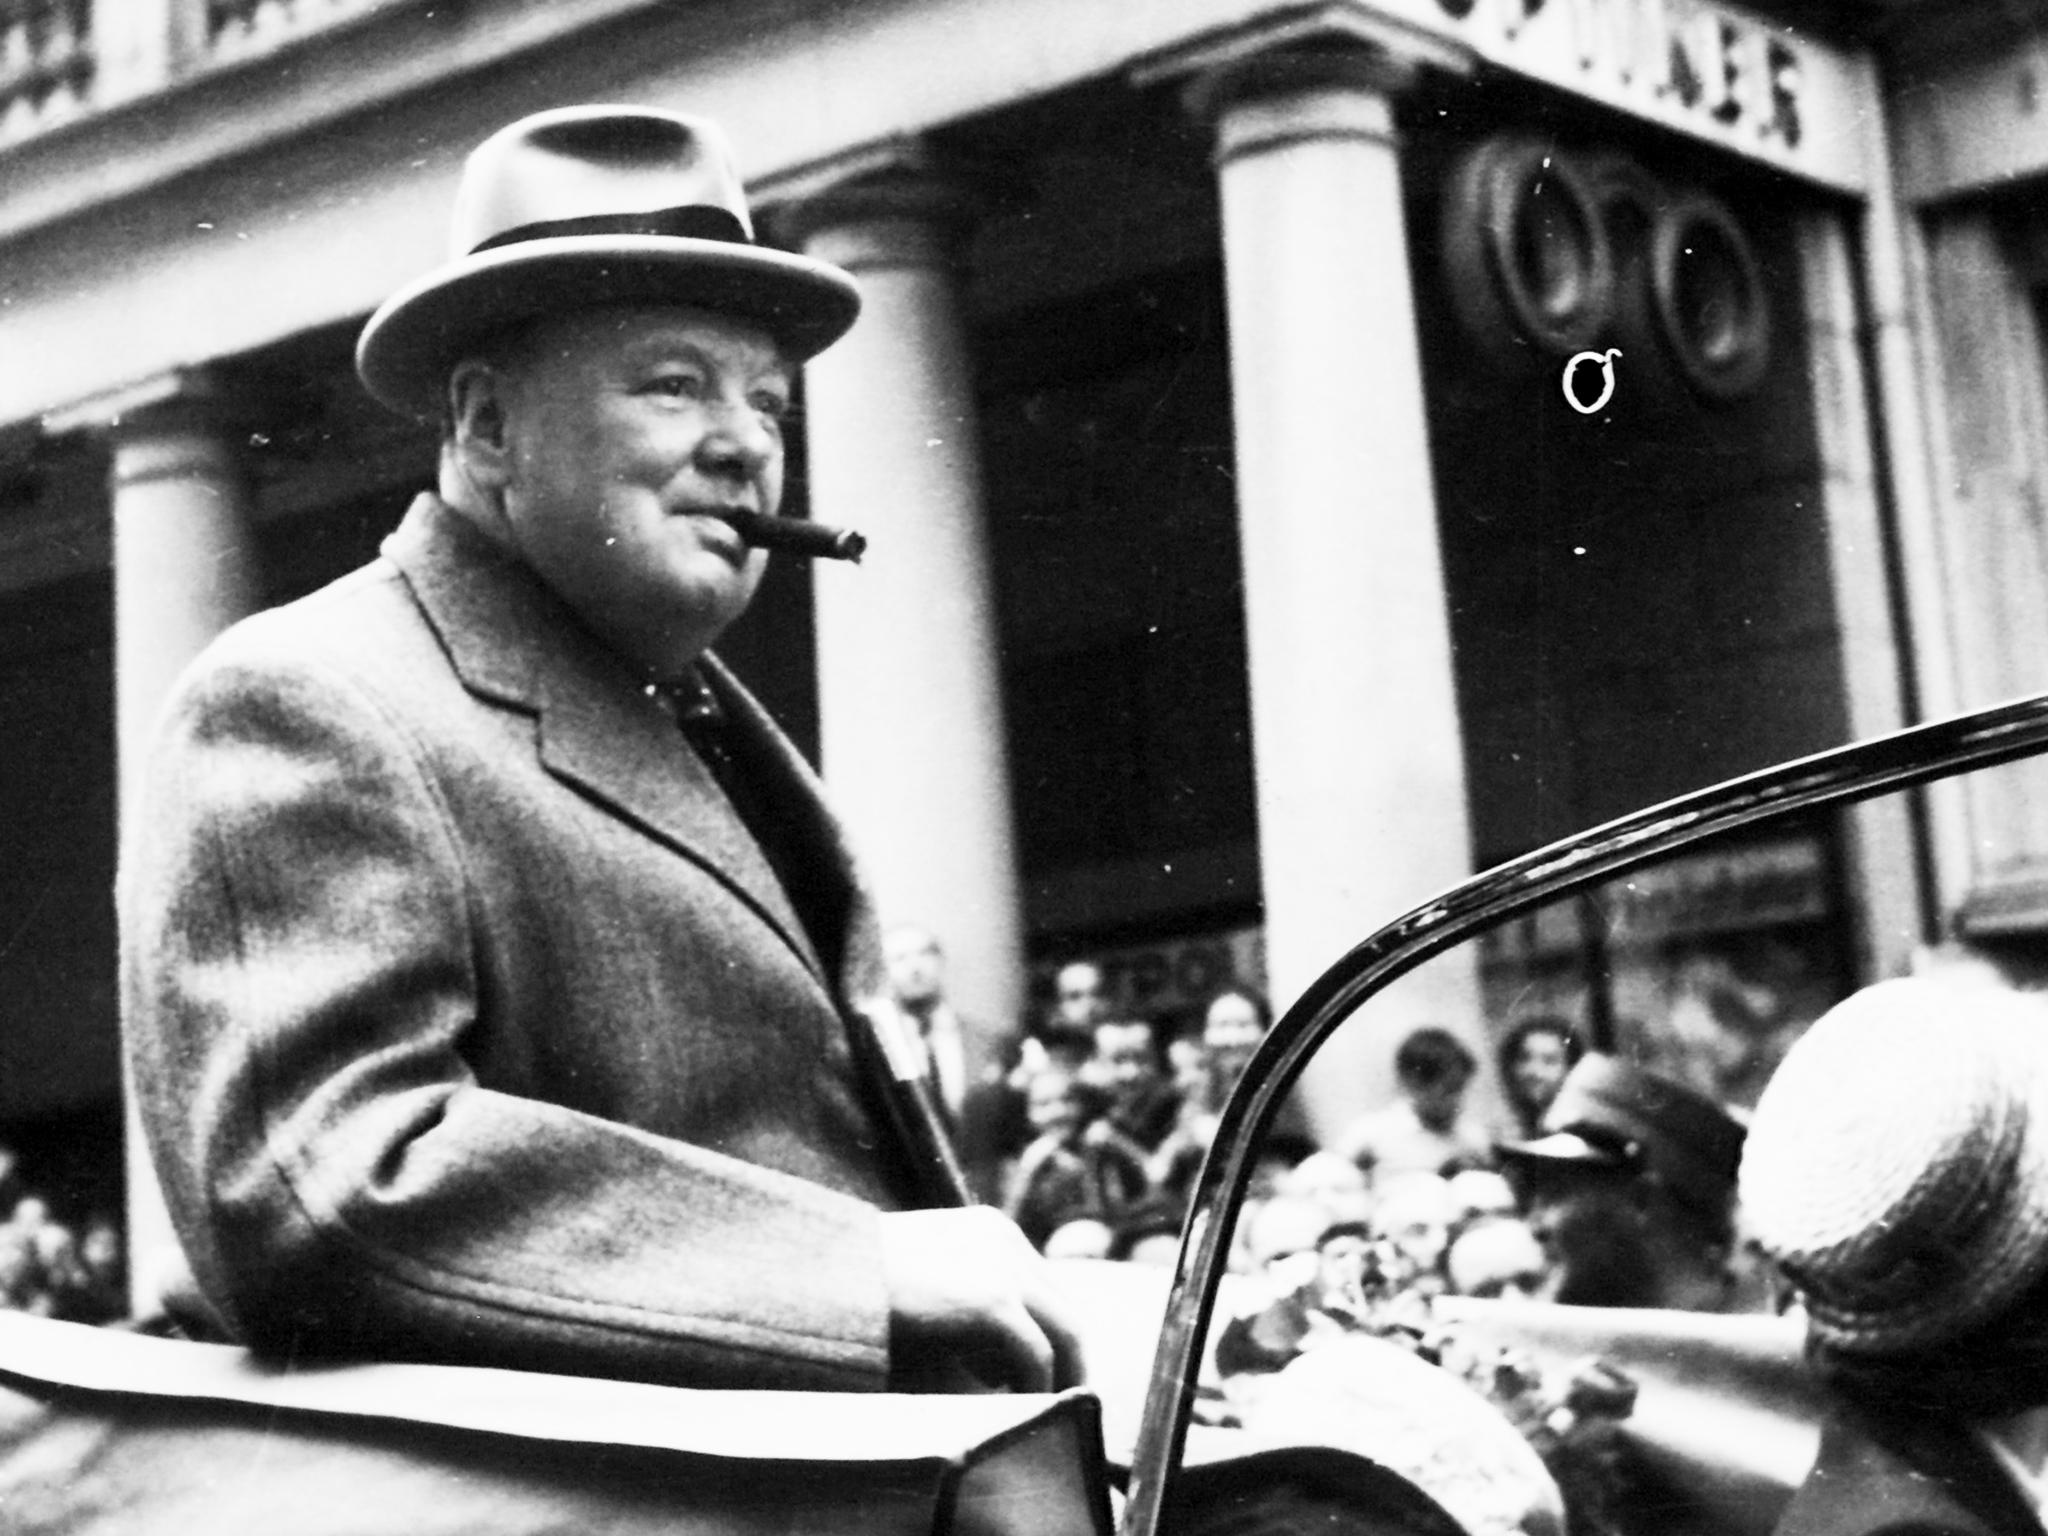 Strength in unity: Churchill wanted the new Europe to shine